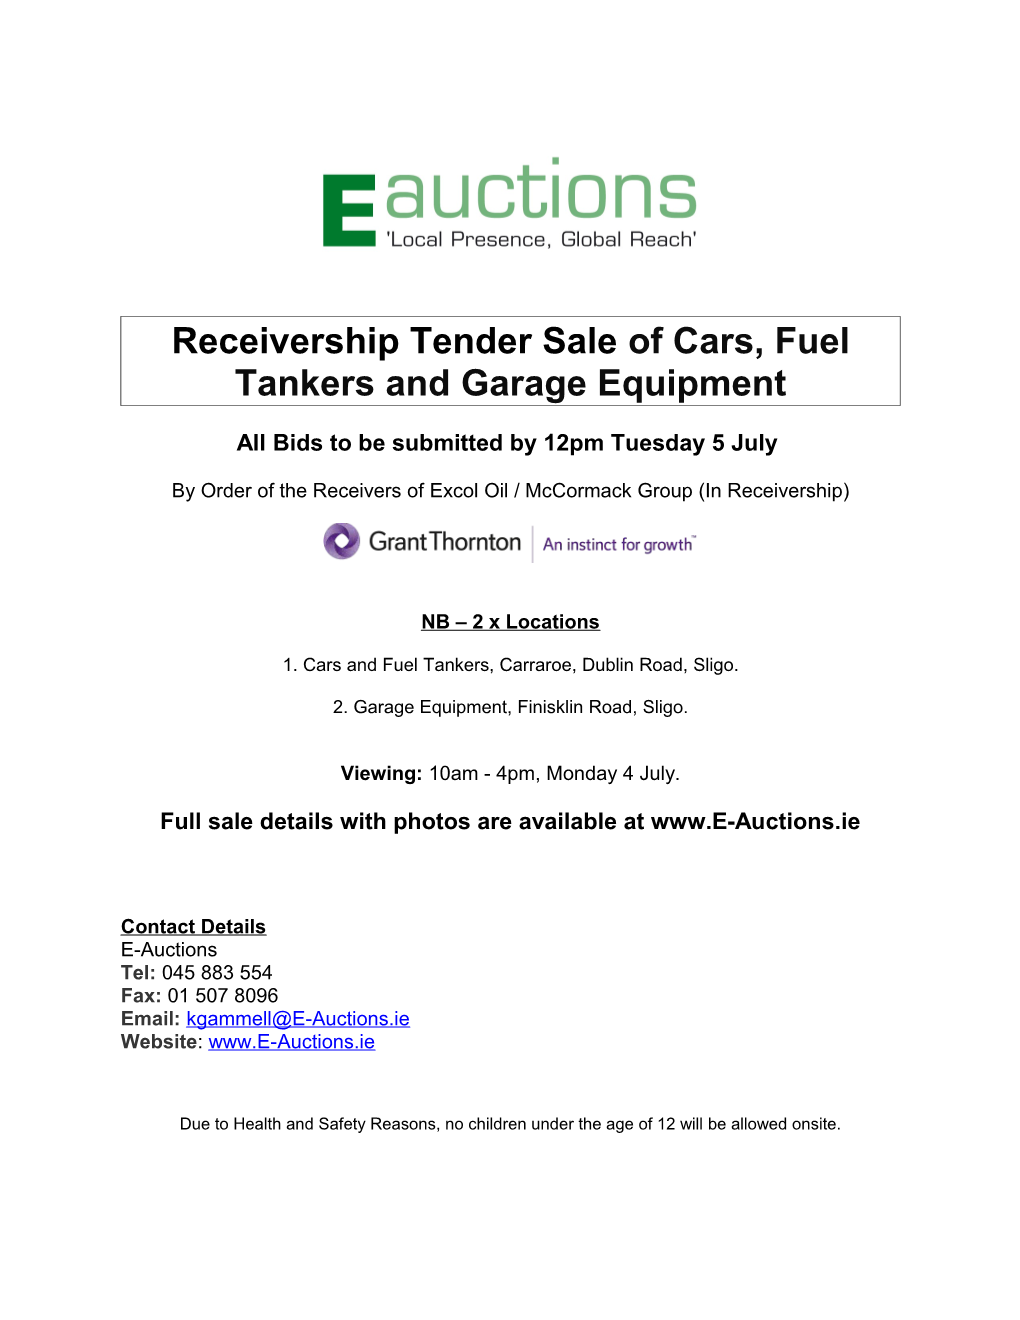 Receivership Tender Sale of Cars, Fuel Tankers and Garage Equipment